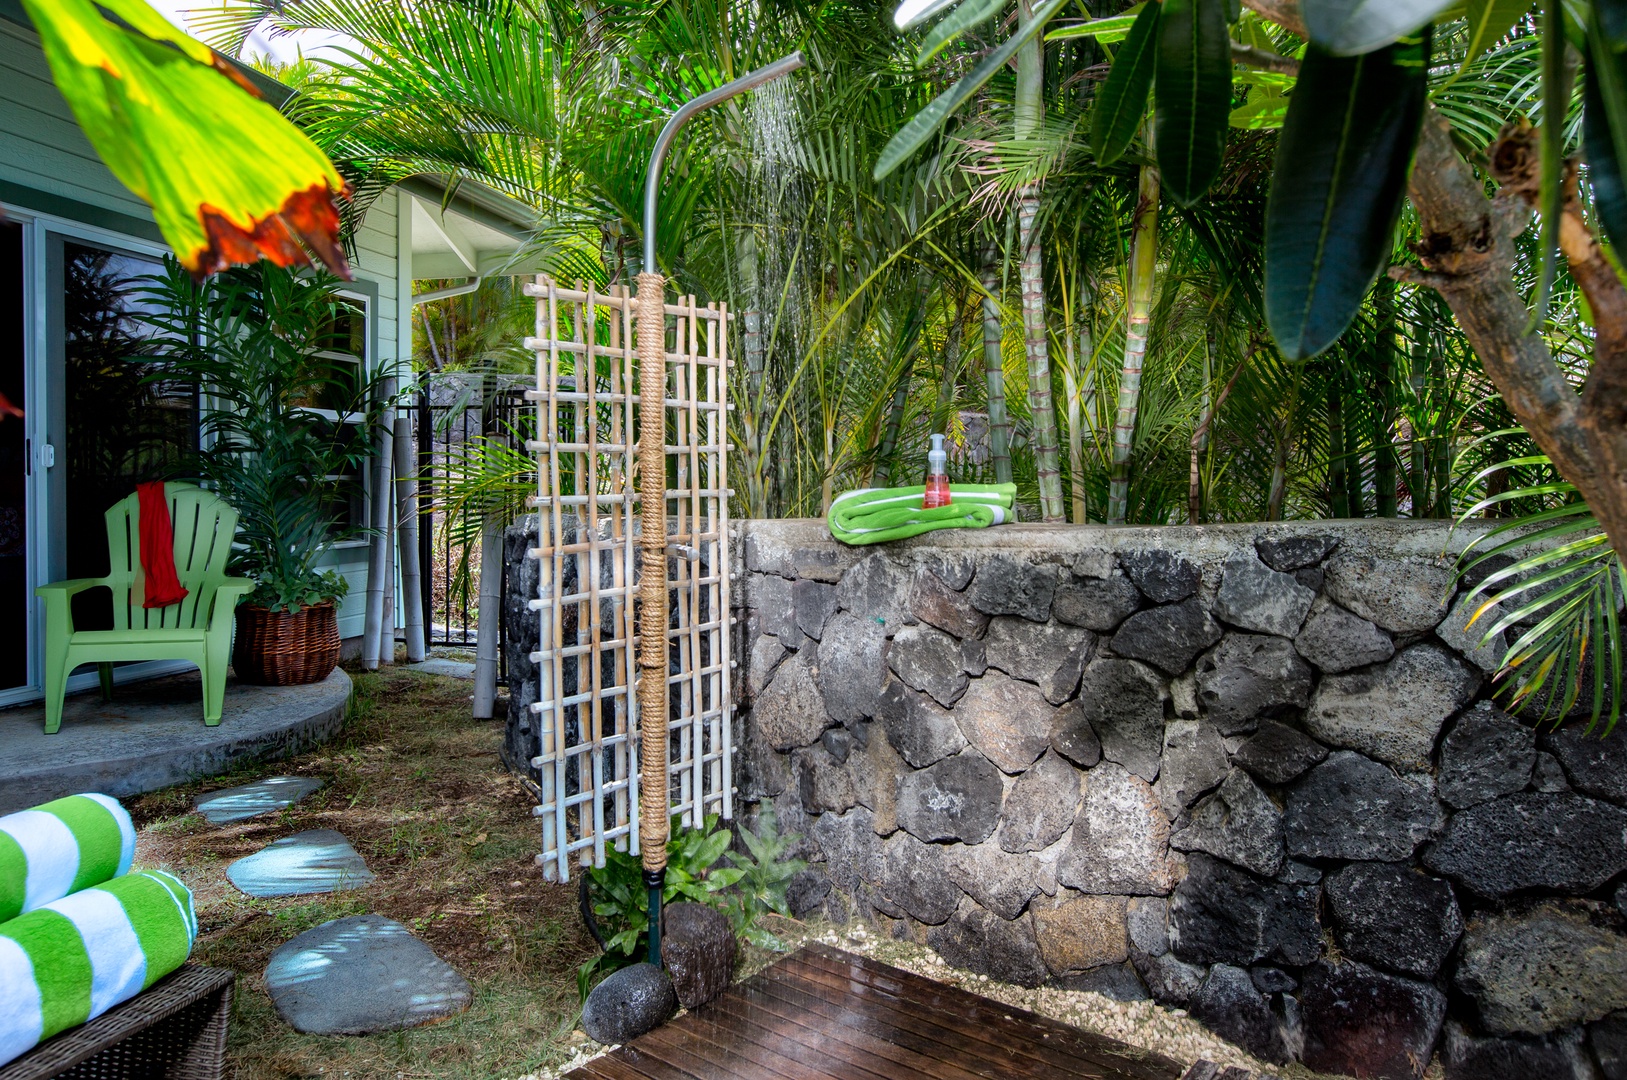 Kailua Kona Vacation Rentals, 7 C's Kona (Big Island) - Rinse off outdoors after a day of sun and sand.